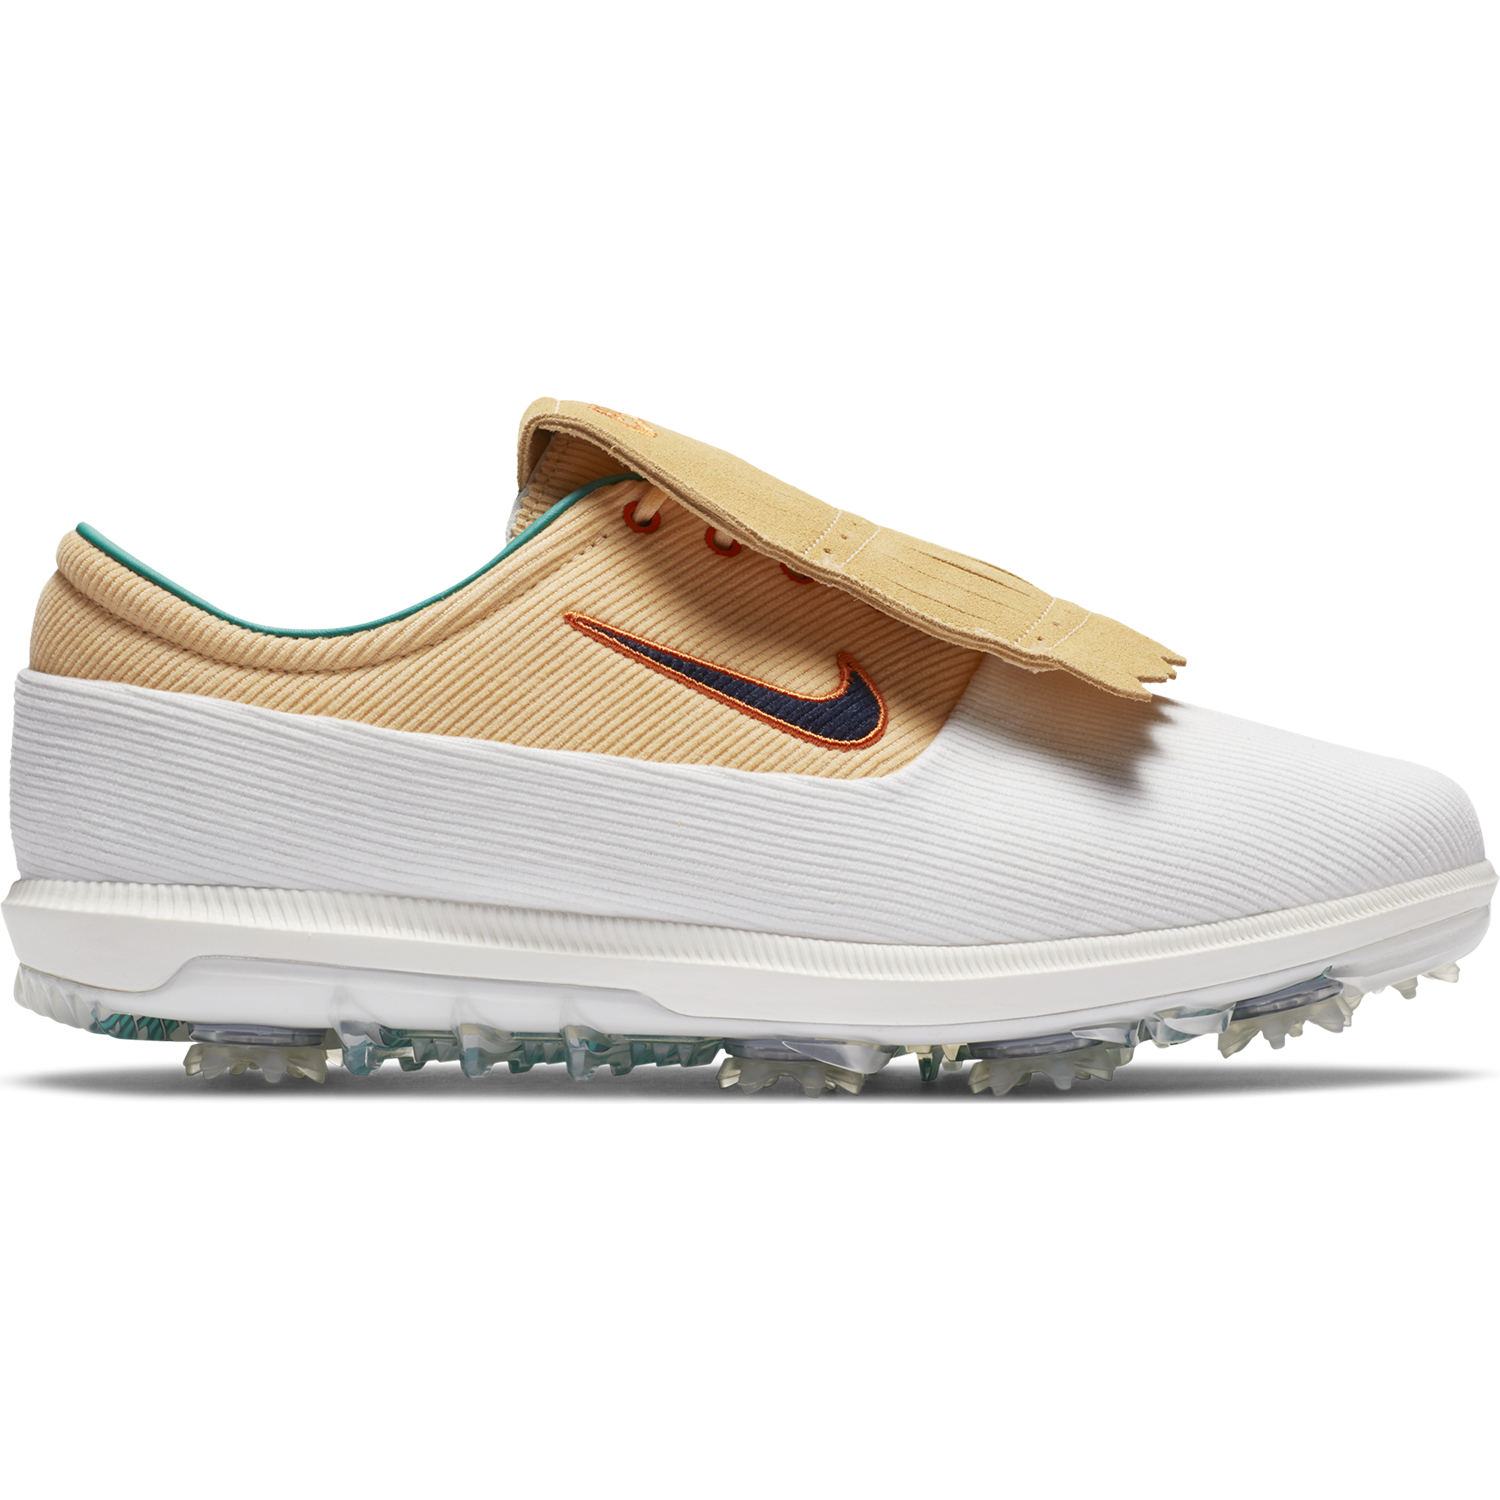 Nike Air Zoom Victory Tour NRG Golf Shoe | PGA TOUR Superstore